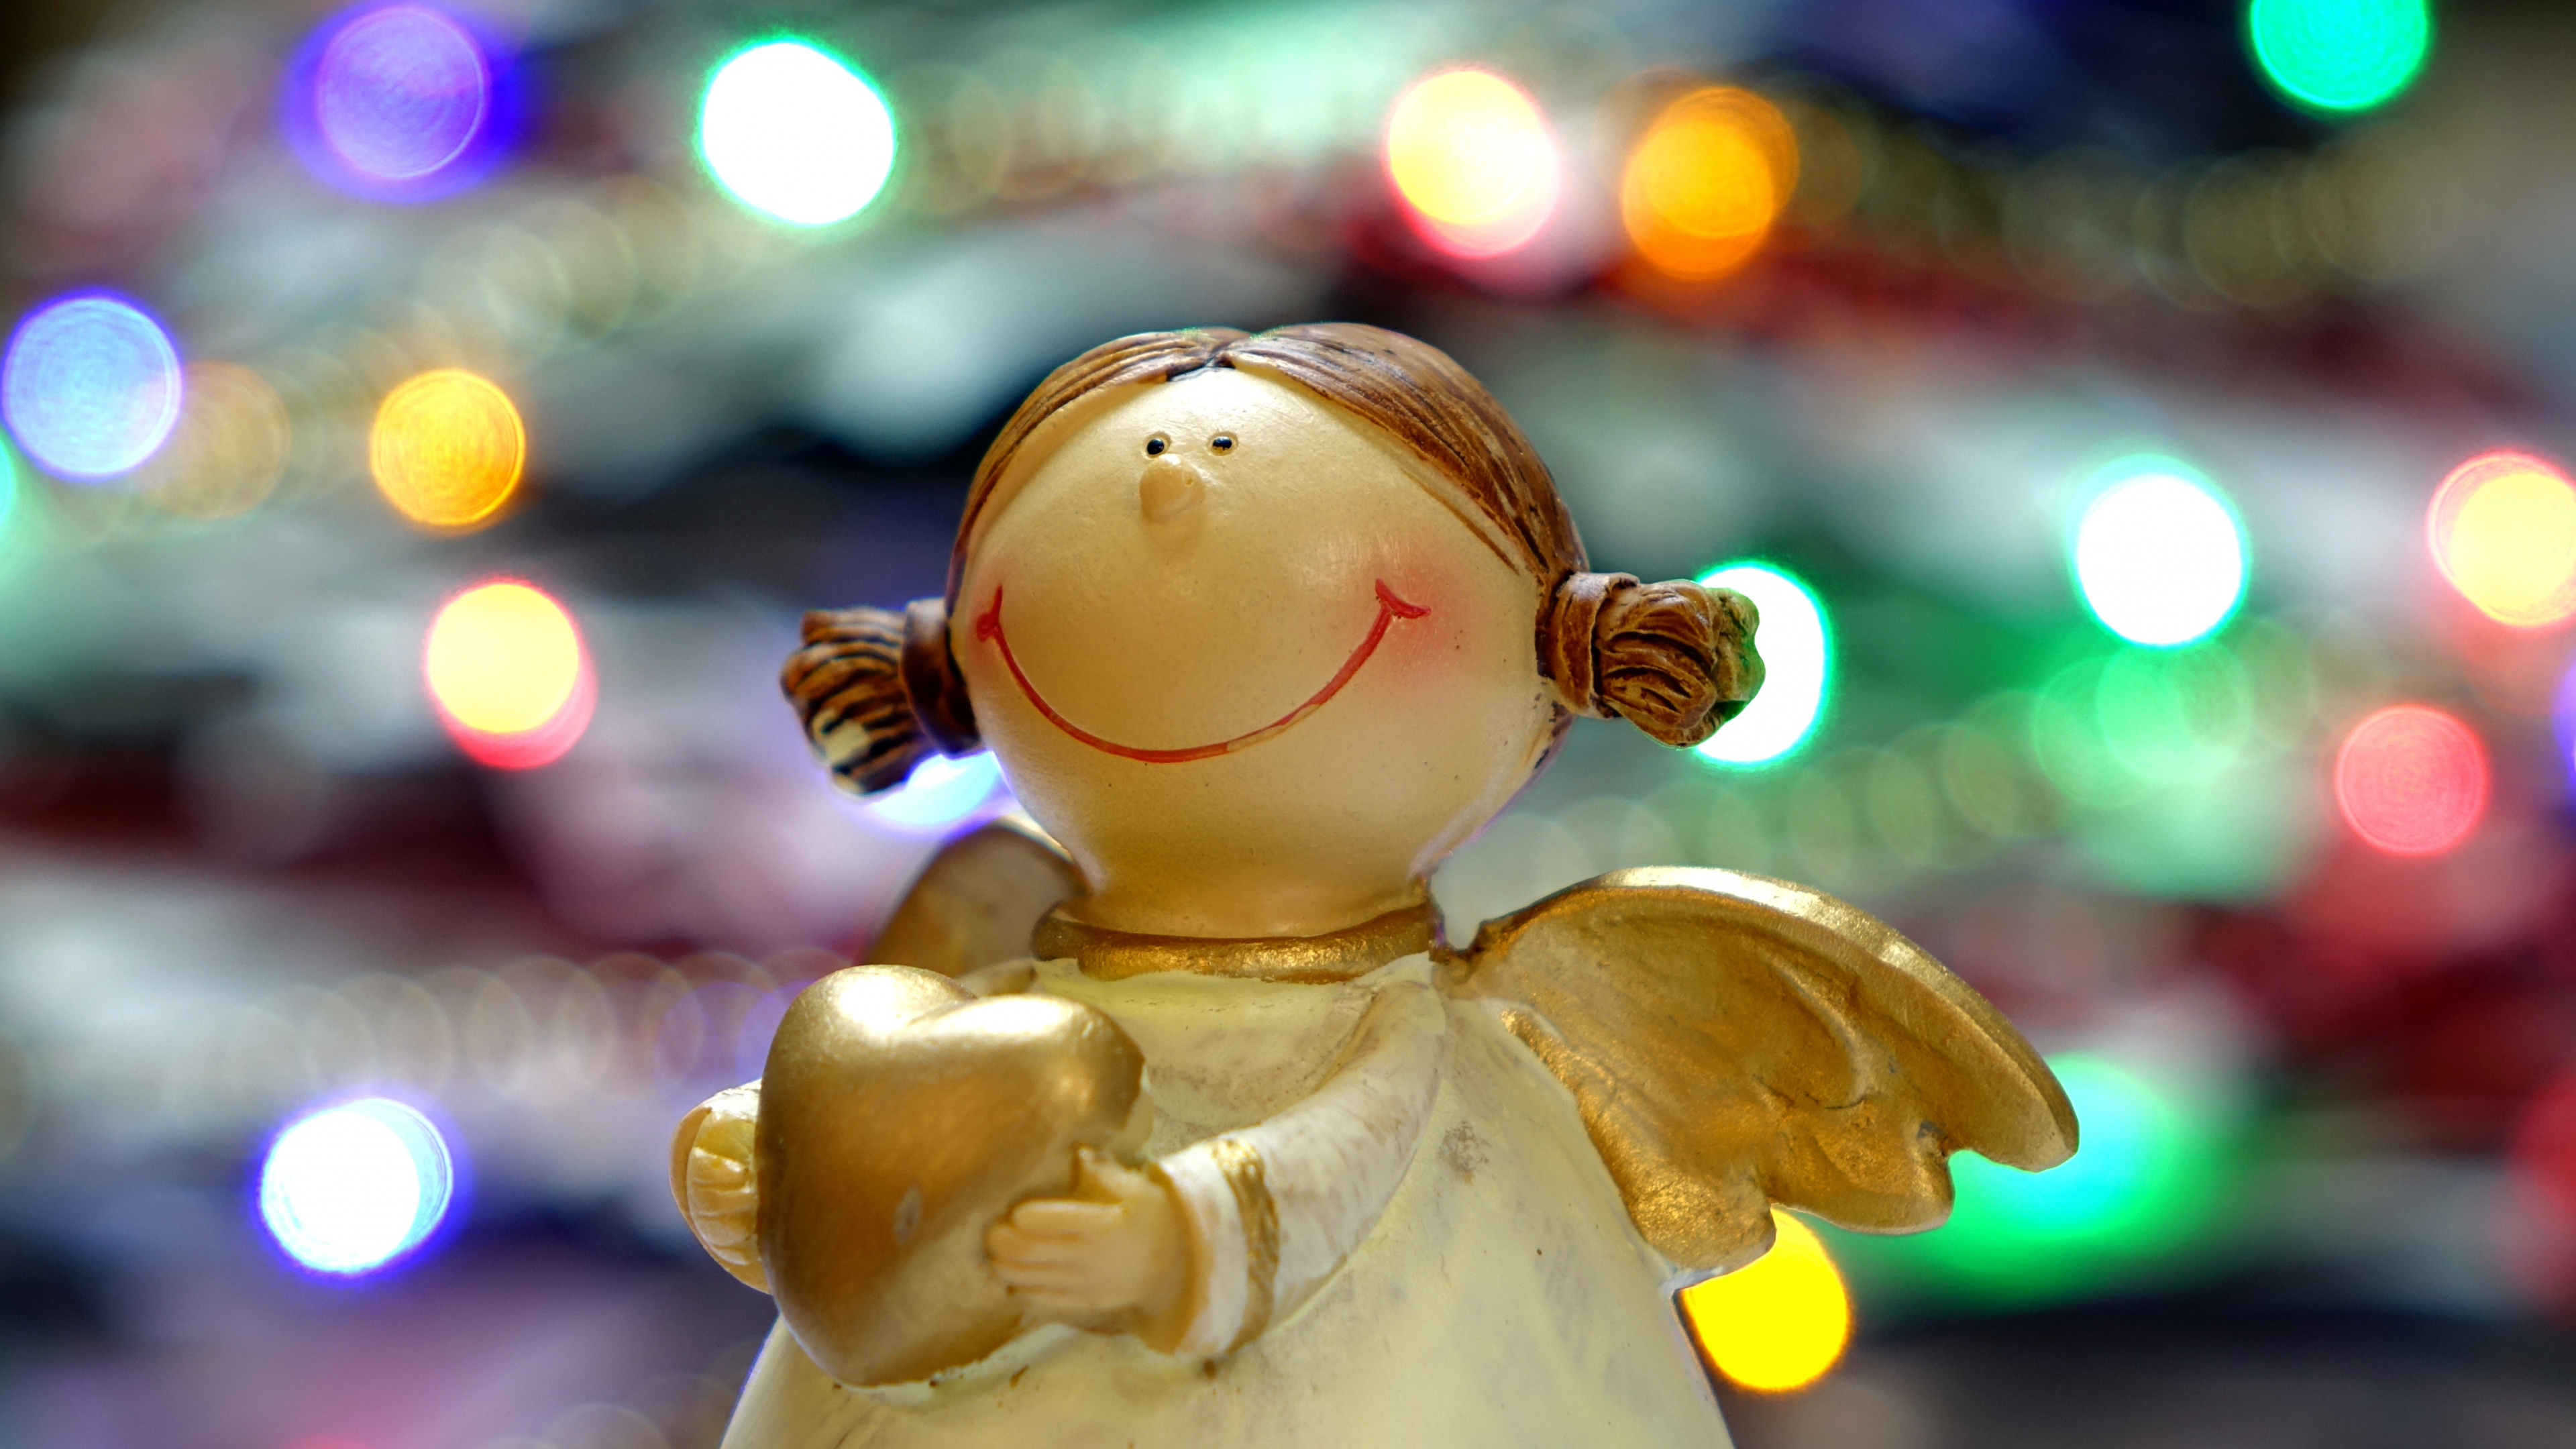 White Angel Ceramic Figurine in Bokeh Photography. Wallpaper in 3840x2160 Resolution